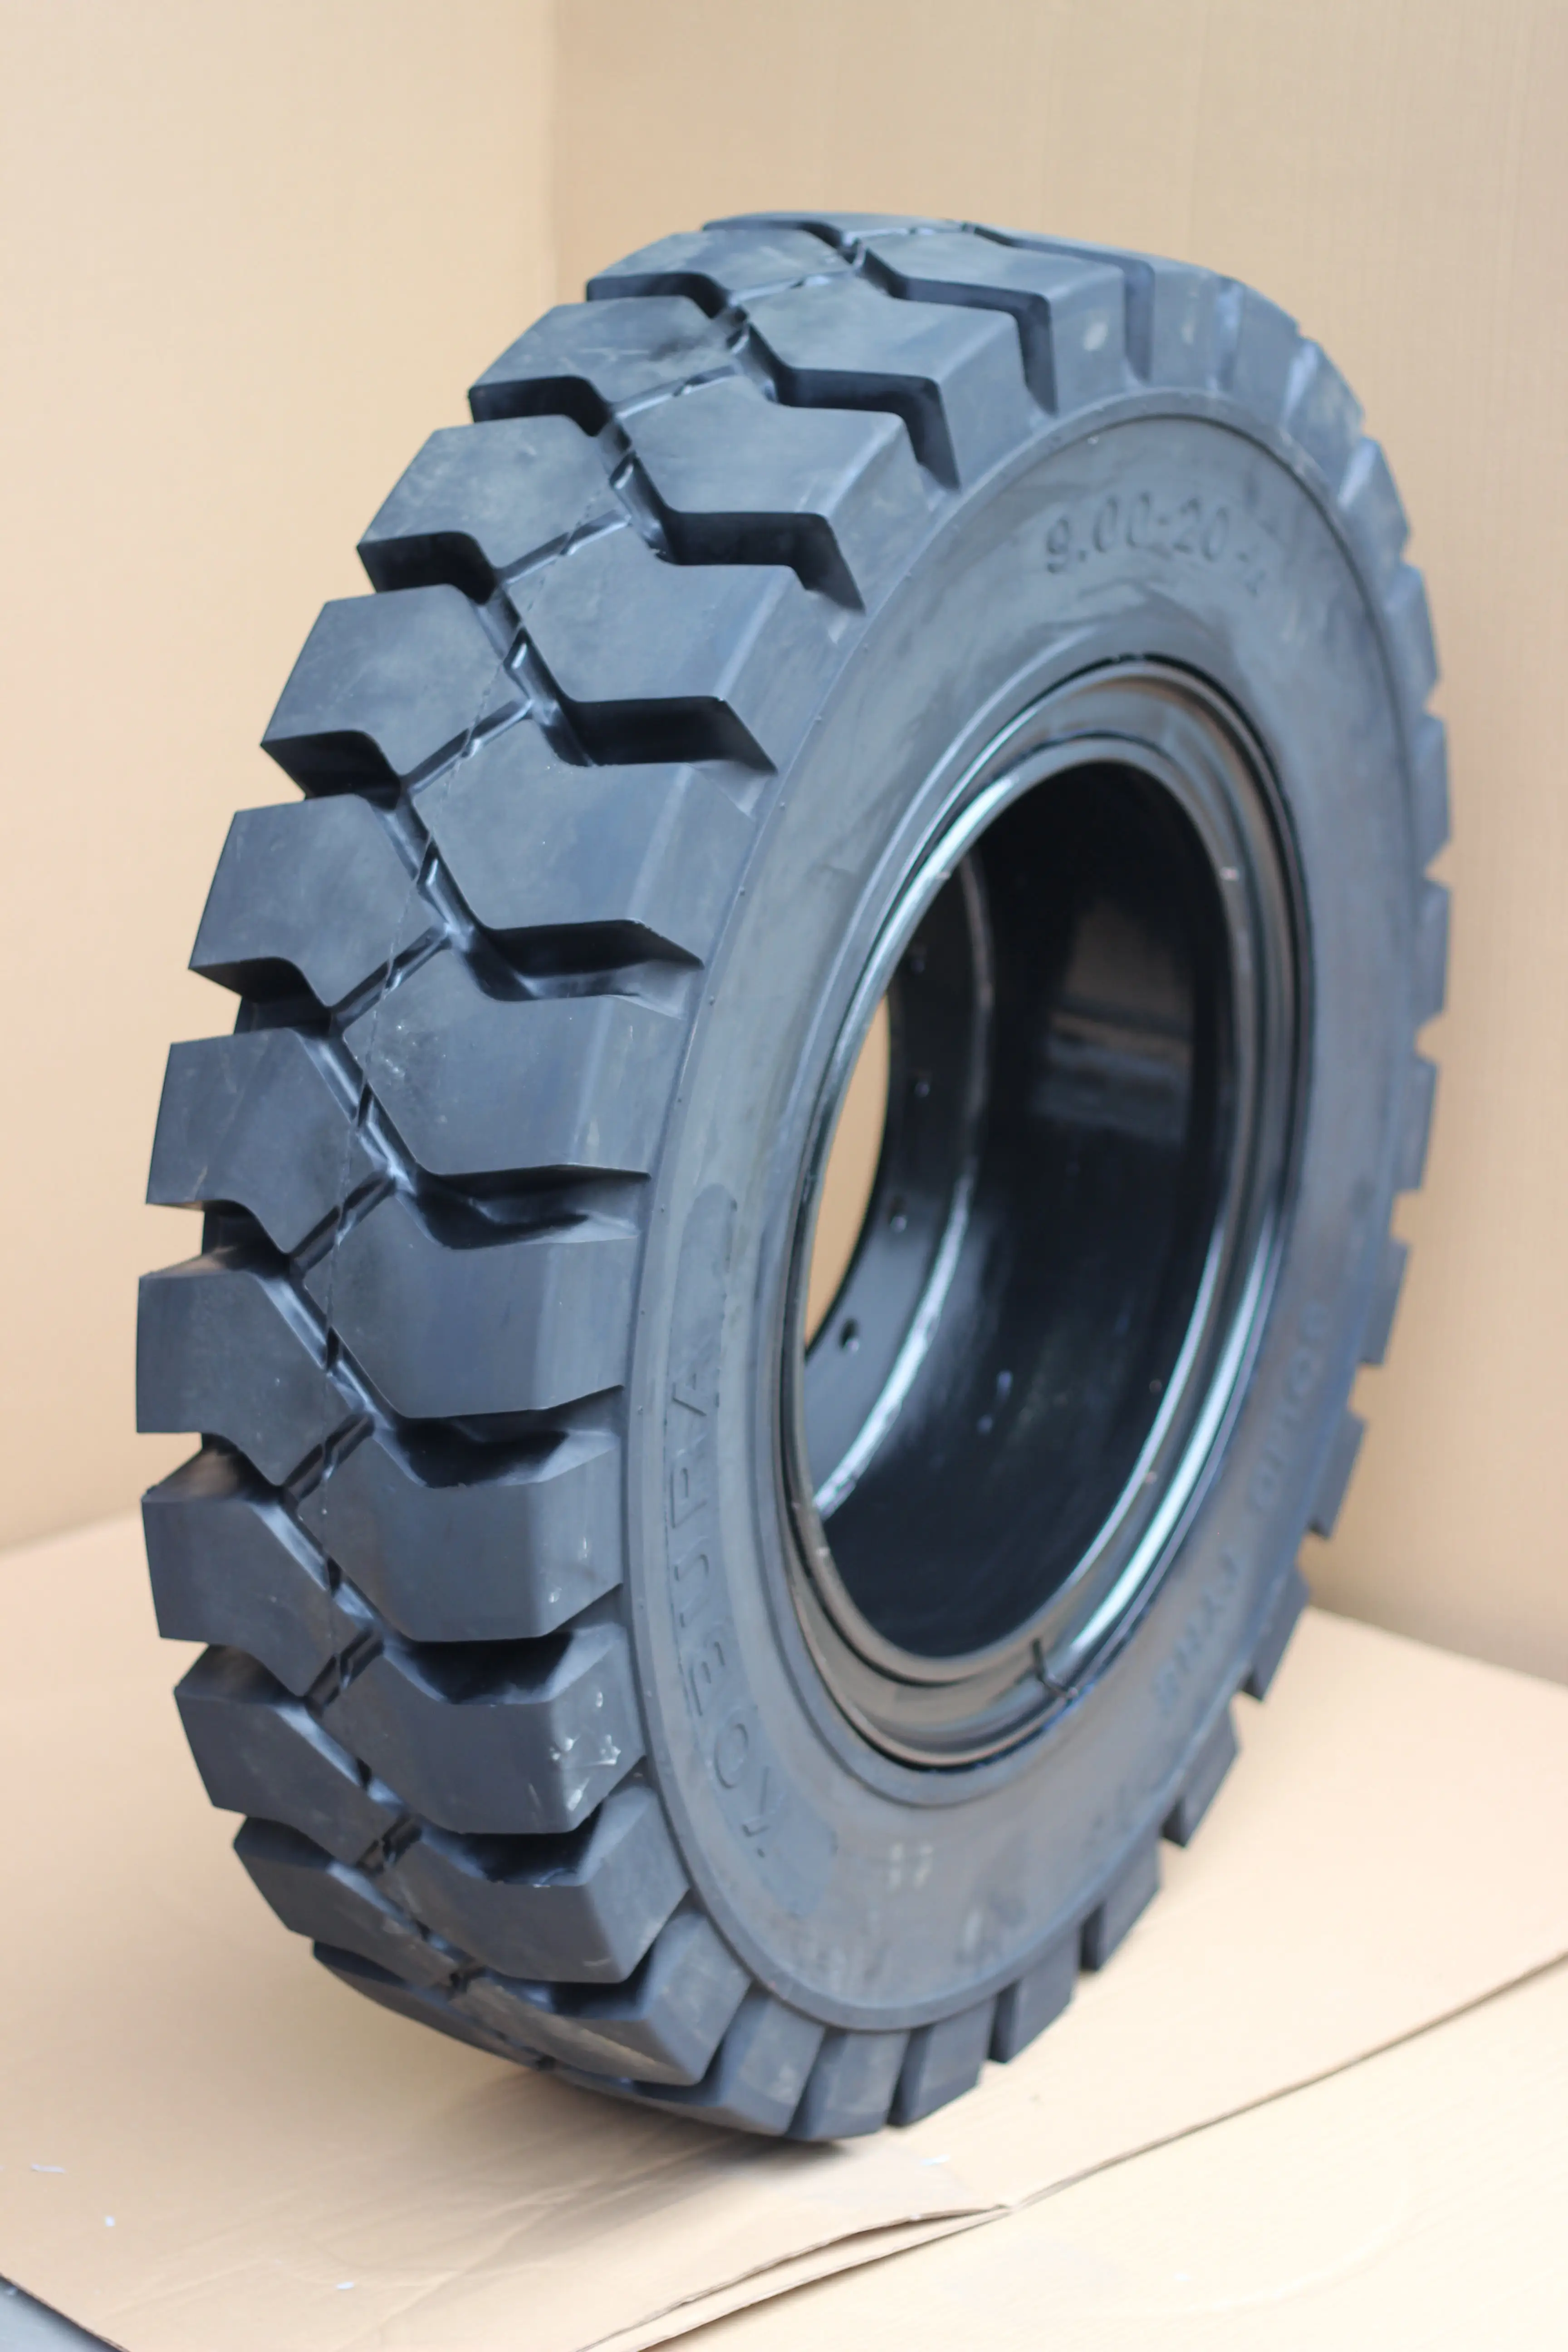 9.00-20 10.00-20 11.00-20 12.00-20 Rubber Solid Tire For Forklift Heavy Trucks Trailers